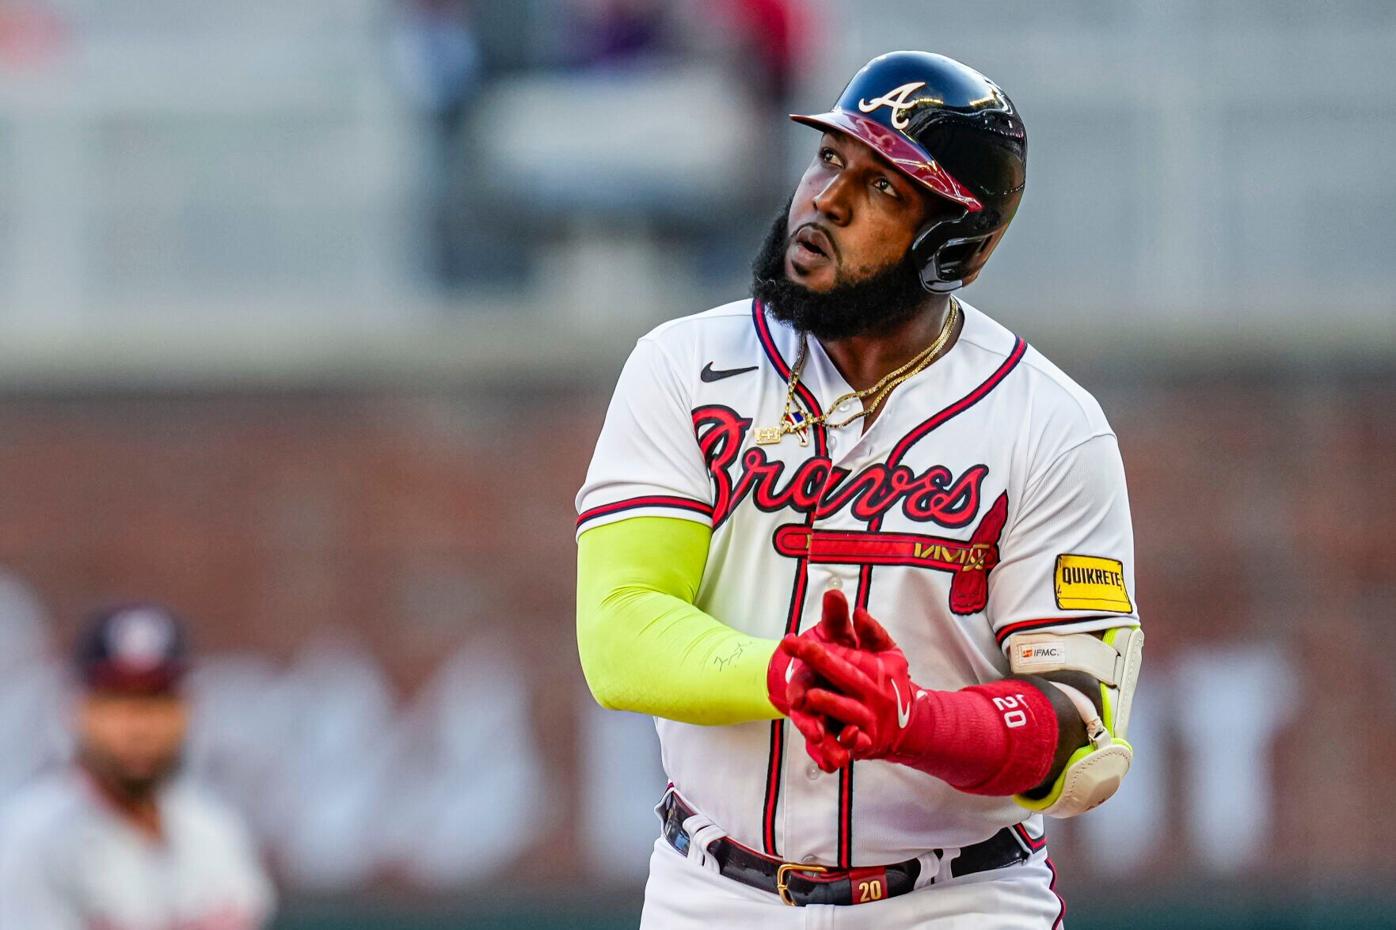 POLL: New Atlanta Braves Uniforms; Share Your Thoughts